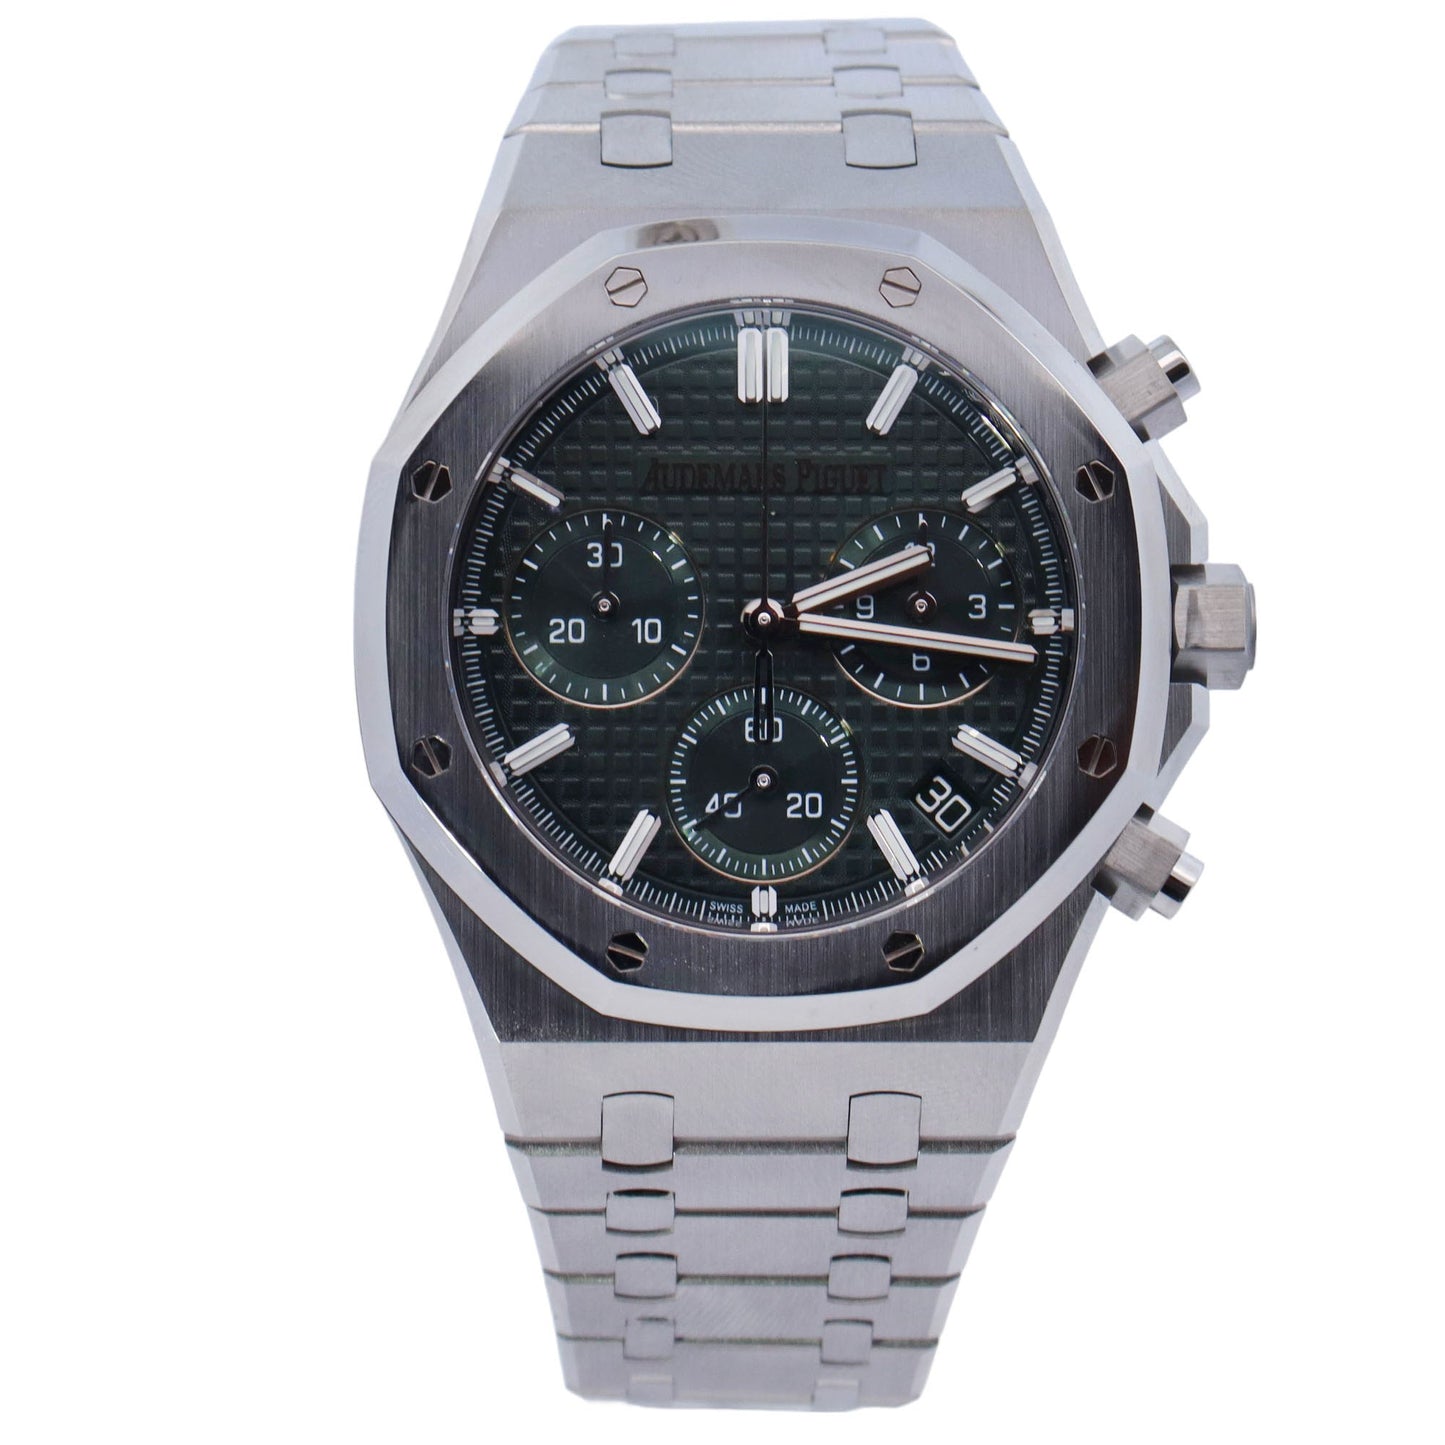 Audemars Piguet Royal Oak Stainless Steel 41mm Olive Chronograph Dial Watch Reference# 26240ST.OO.1320ST.04